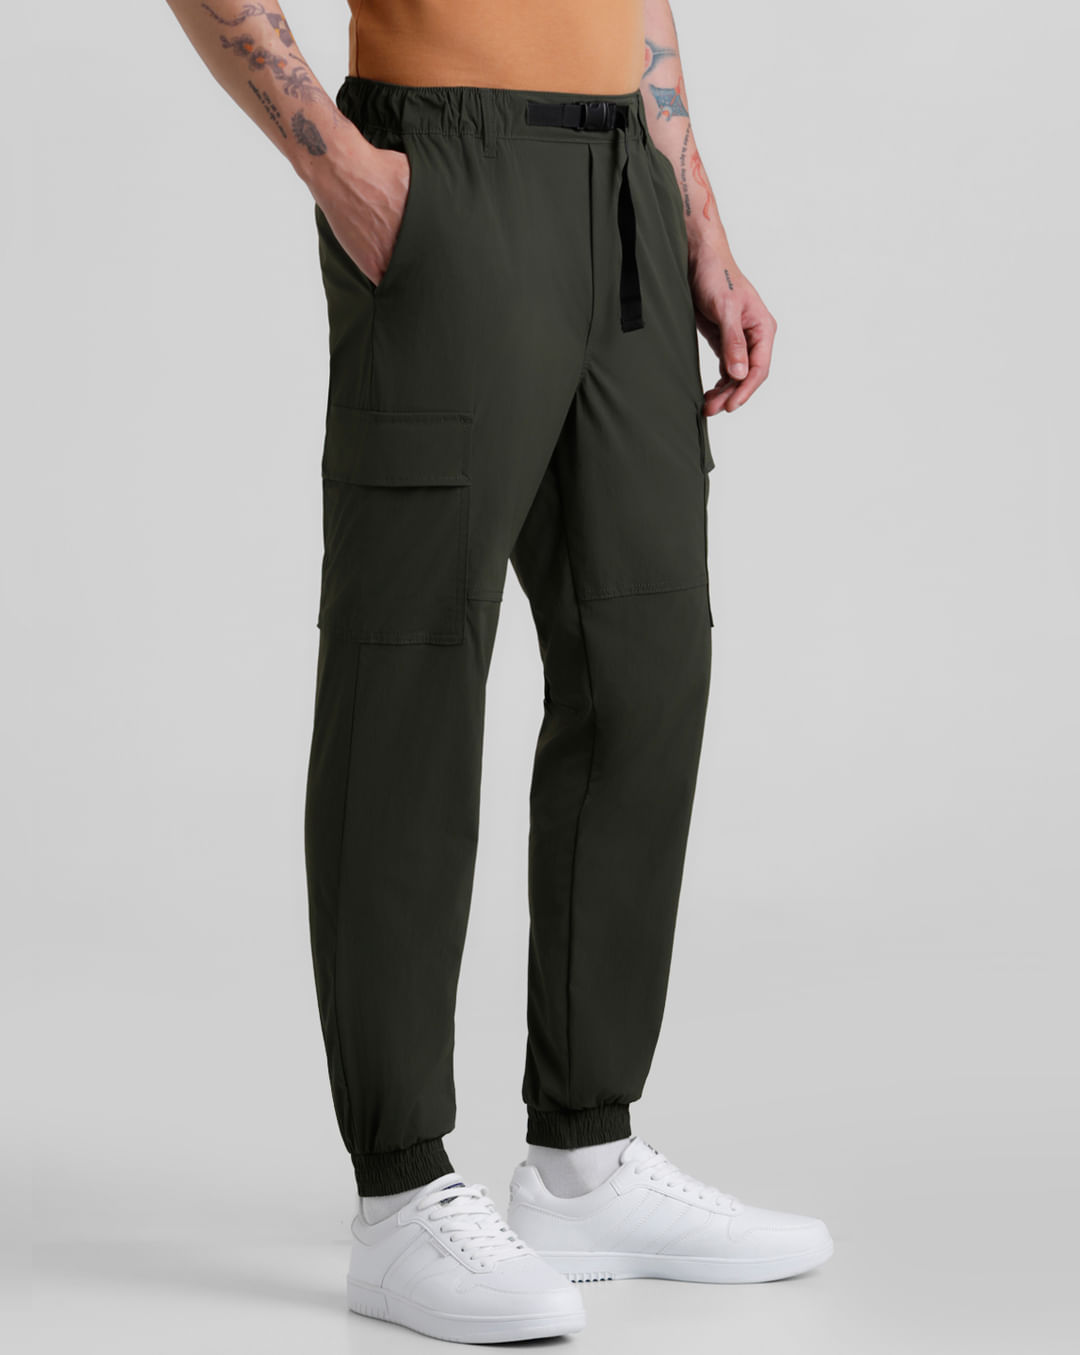 Green Mid Rise Cargo Pants|247243002